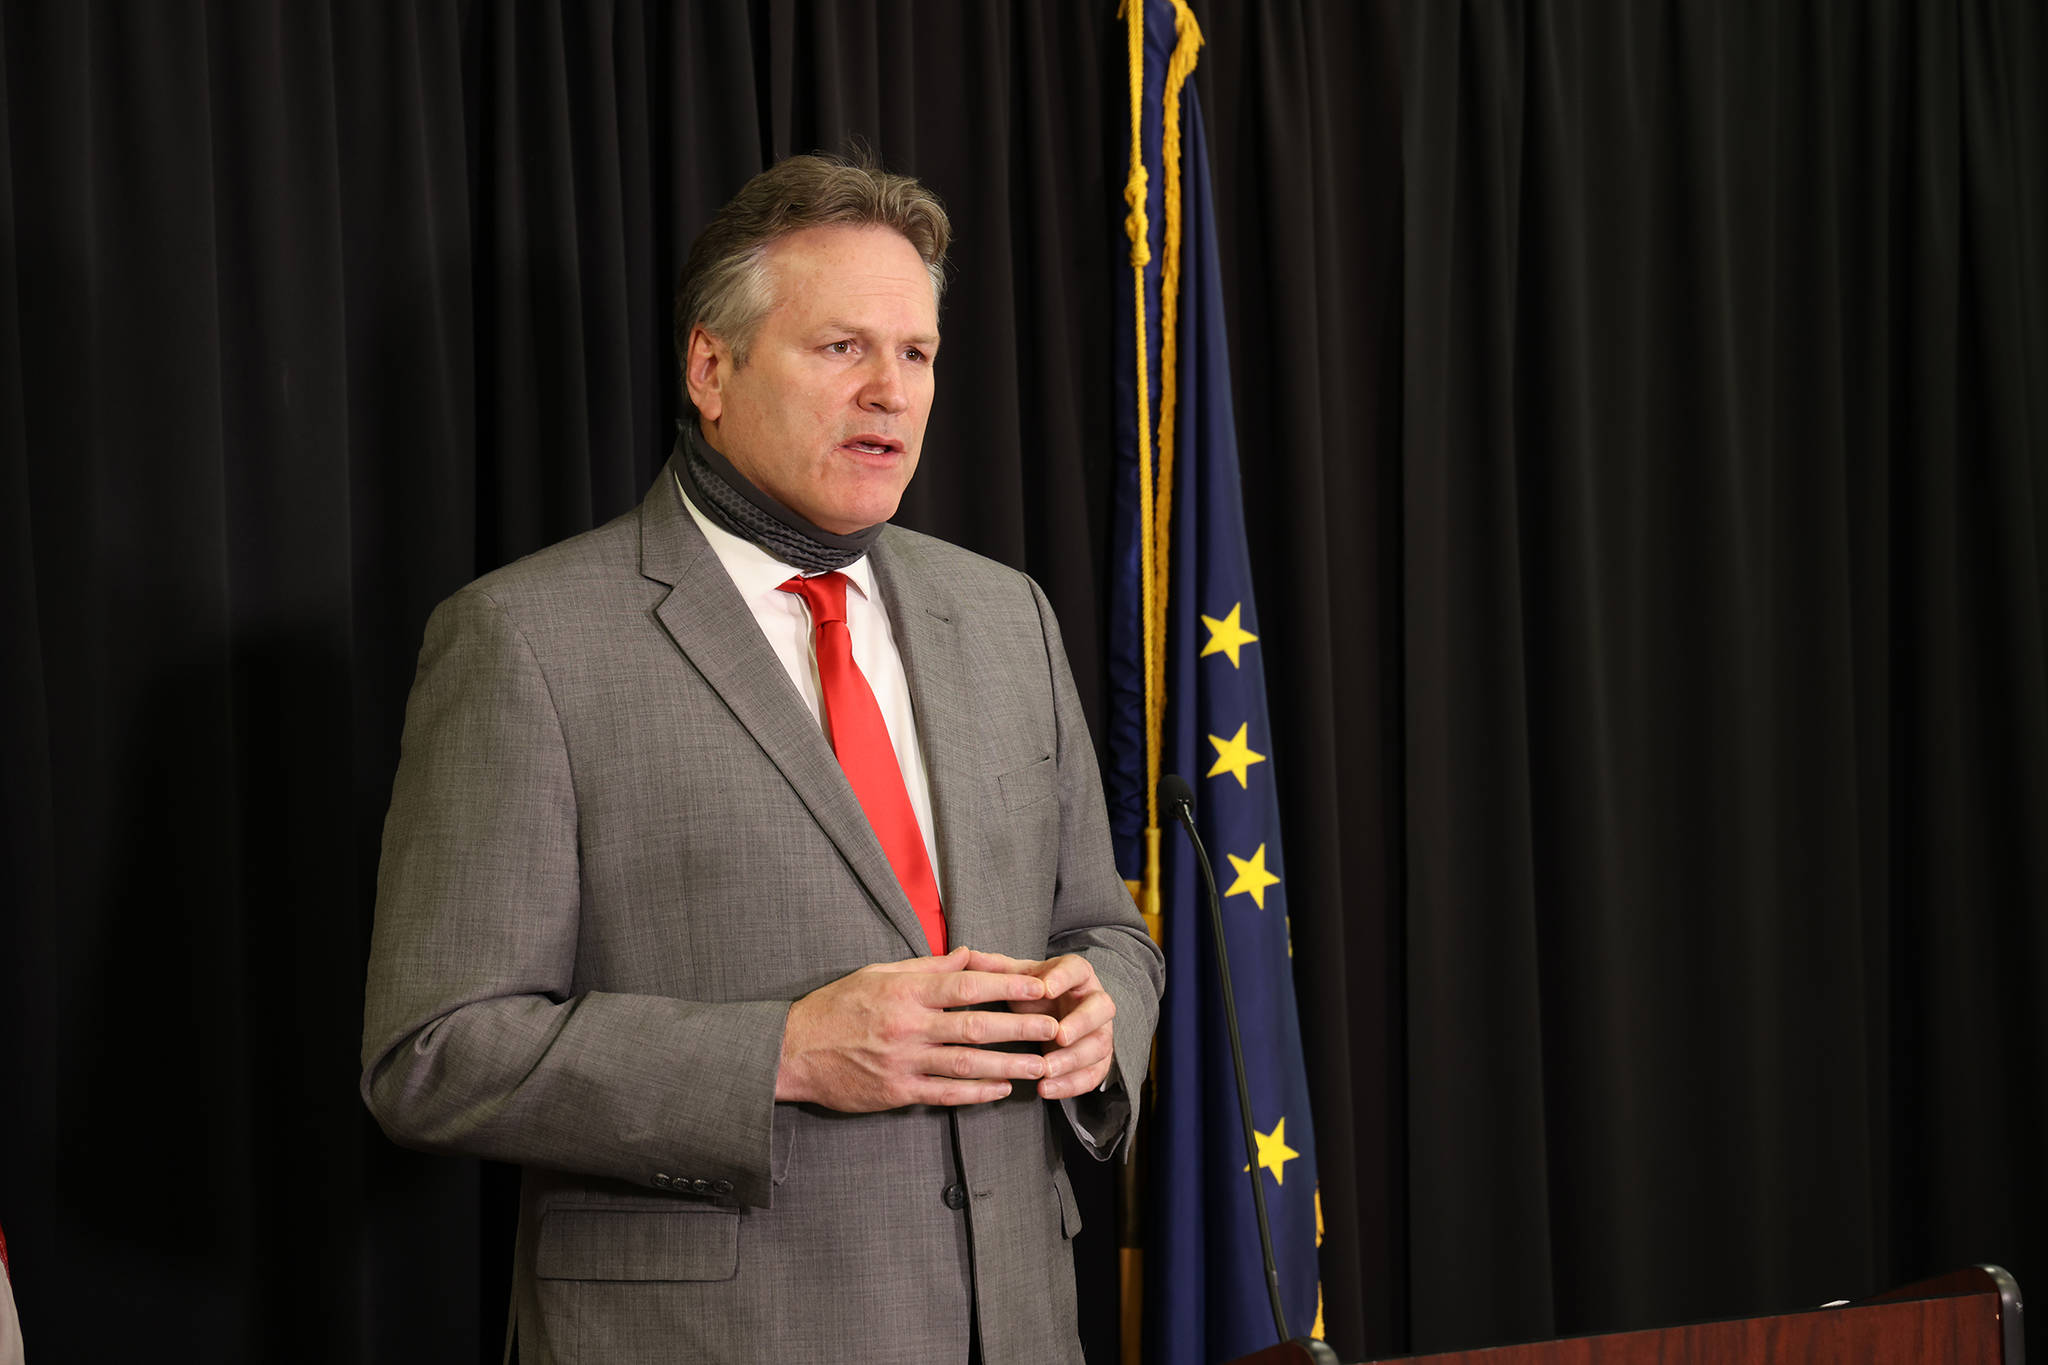 Gov. Mike Dunleavy, who spoke to the Empire via phone Wednesday, speaks at an Anchorage press conference on Dec. 11, 2020. (Courtesy photo / Office of Gov. Mike Dunleavy)